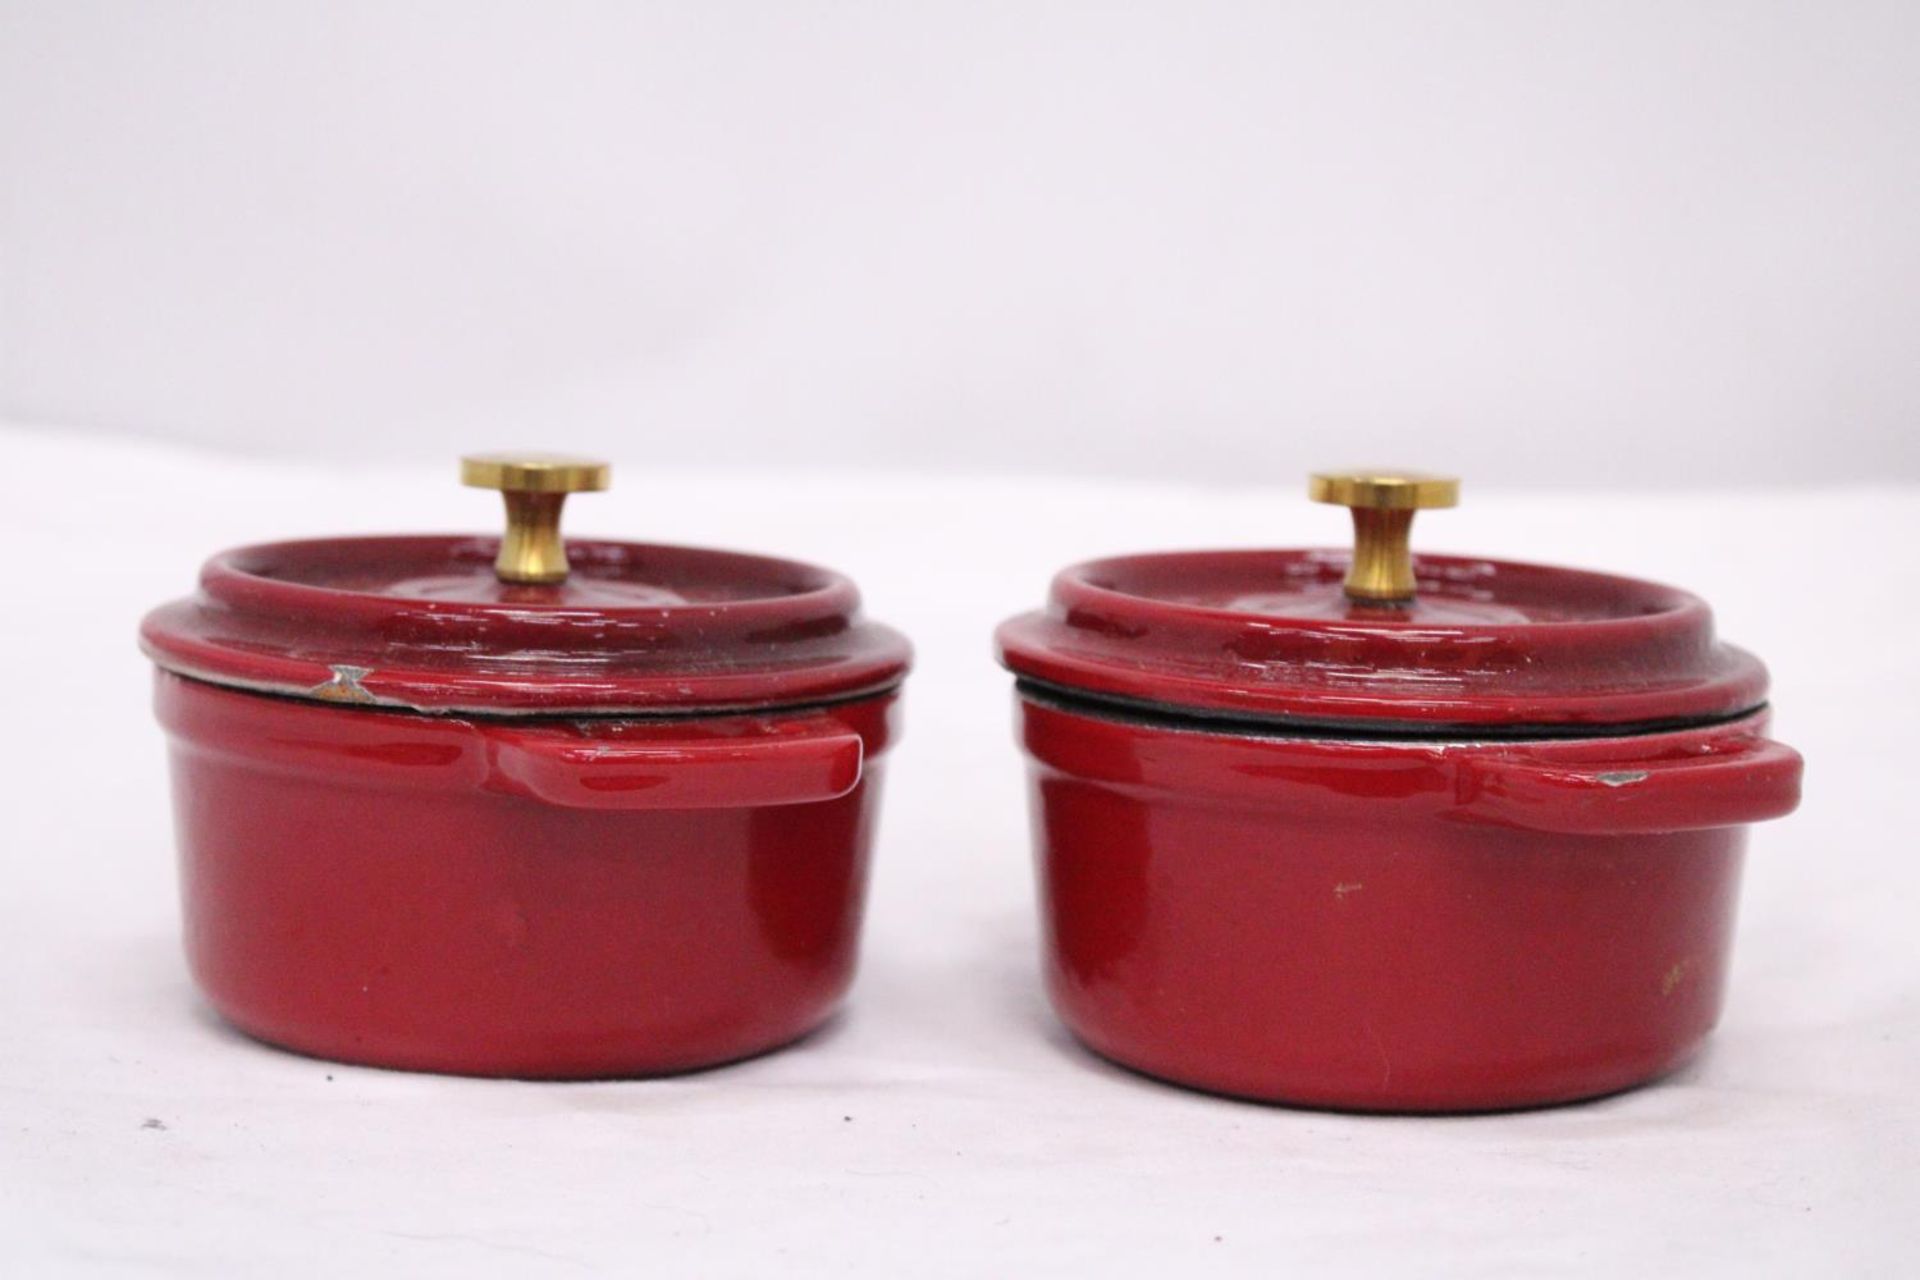 TWO MINI CAST IRON LIDDED COOKING POTS - Image 3 of 4